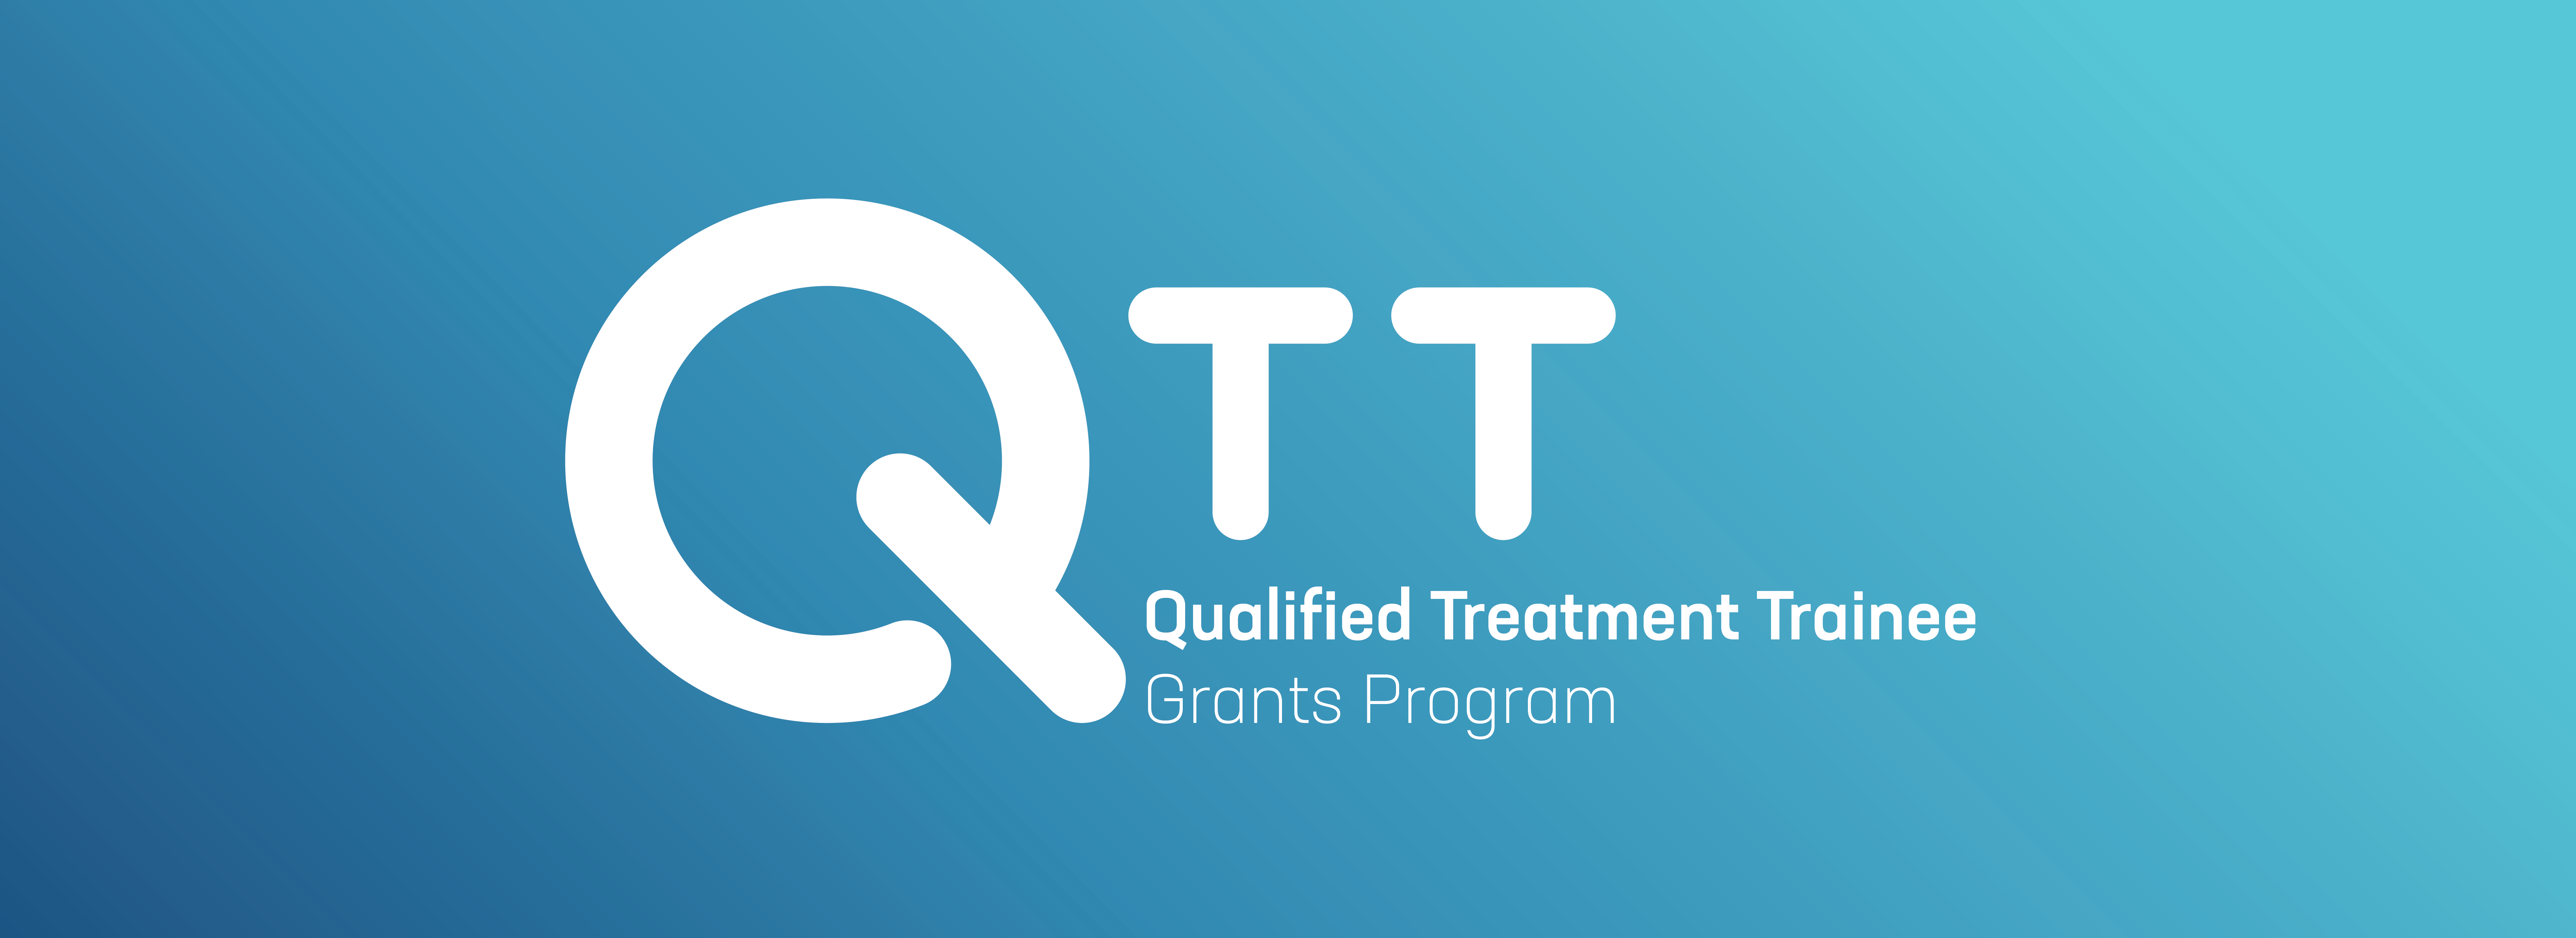 Qualified Treatment Trainee